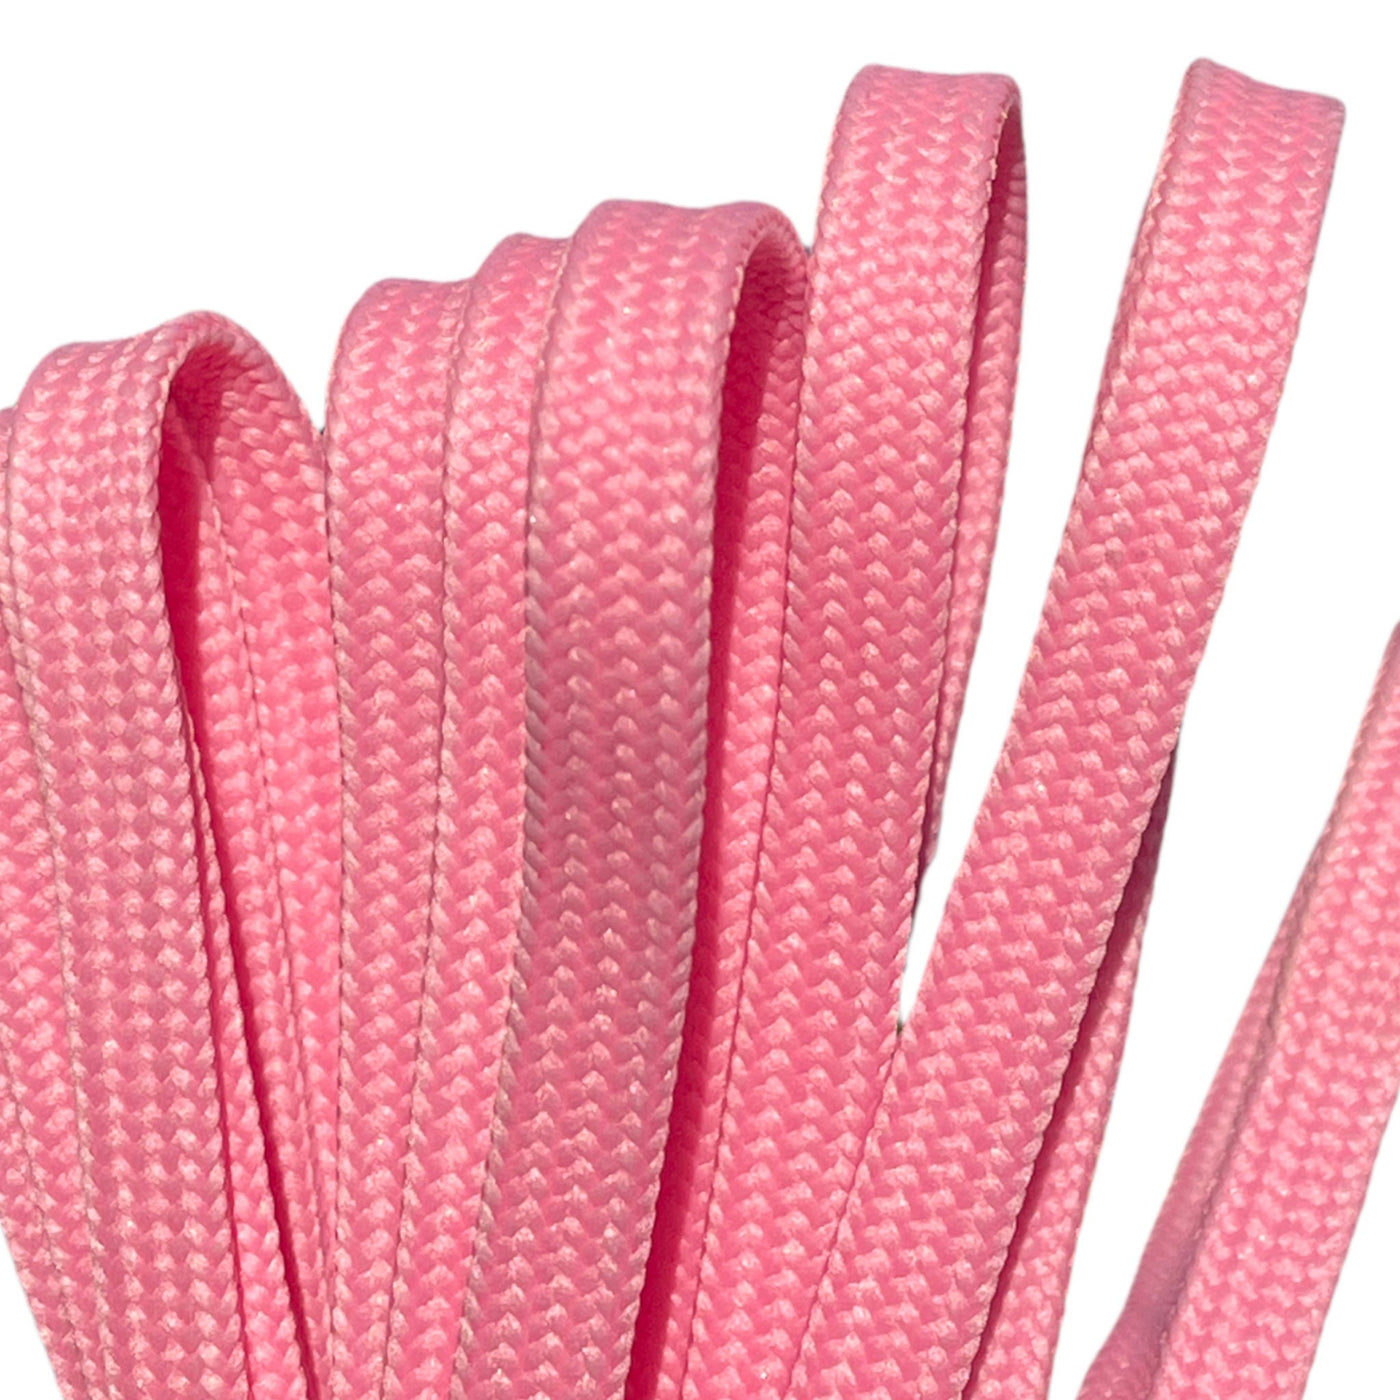 Cotton Candy Pink 96 inch CORE Roller Skate Laces (Narrow 6mm)